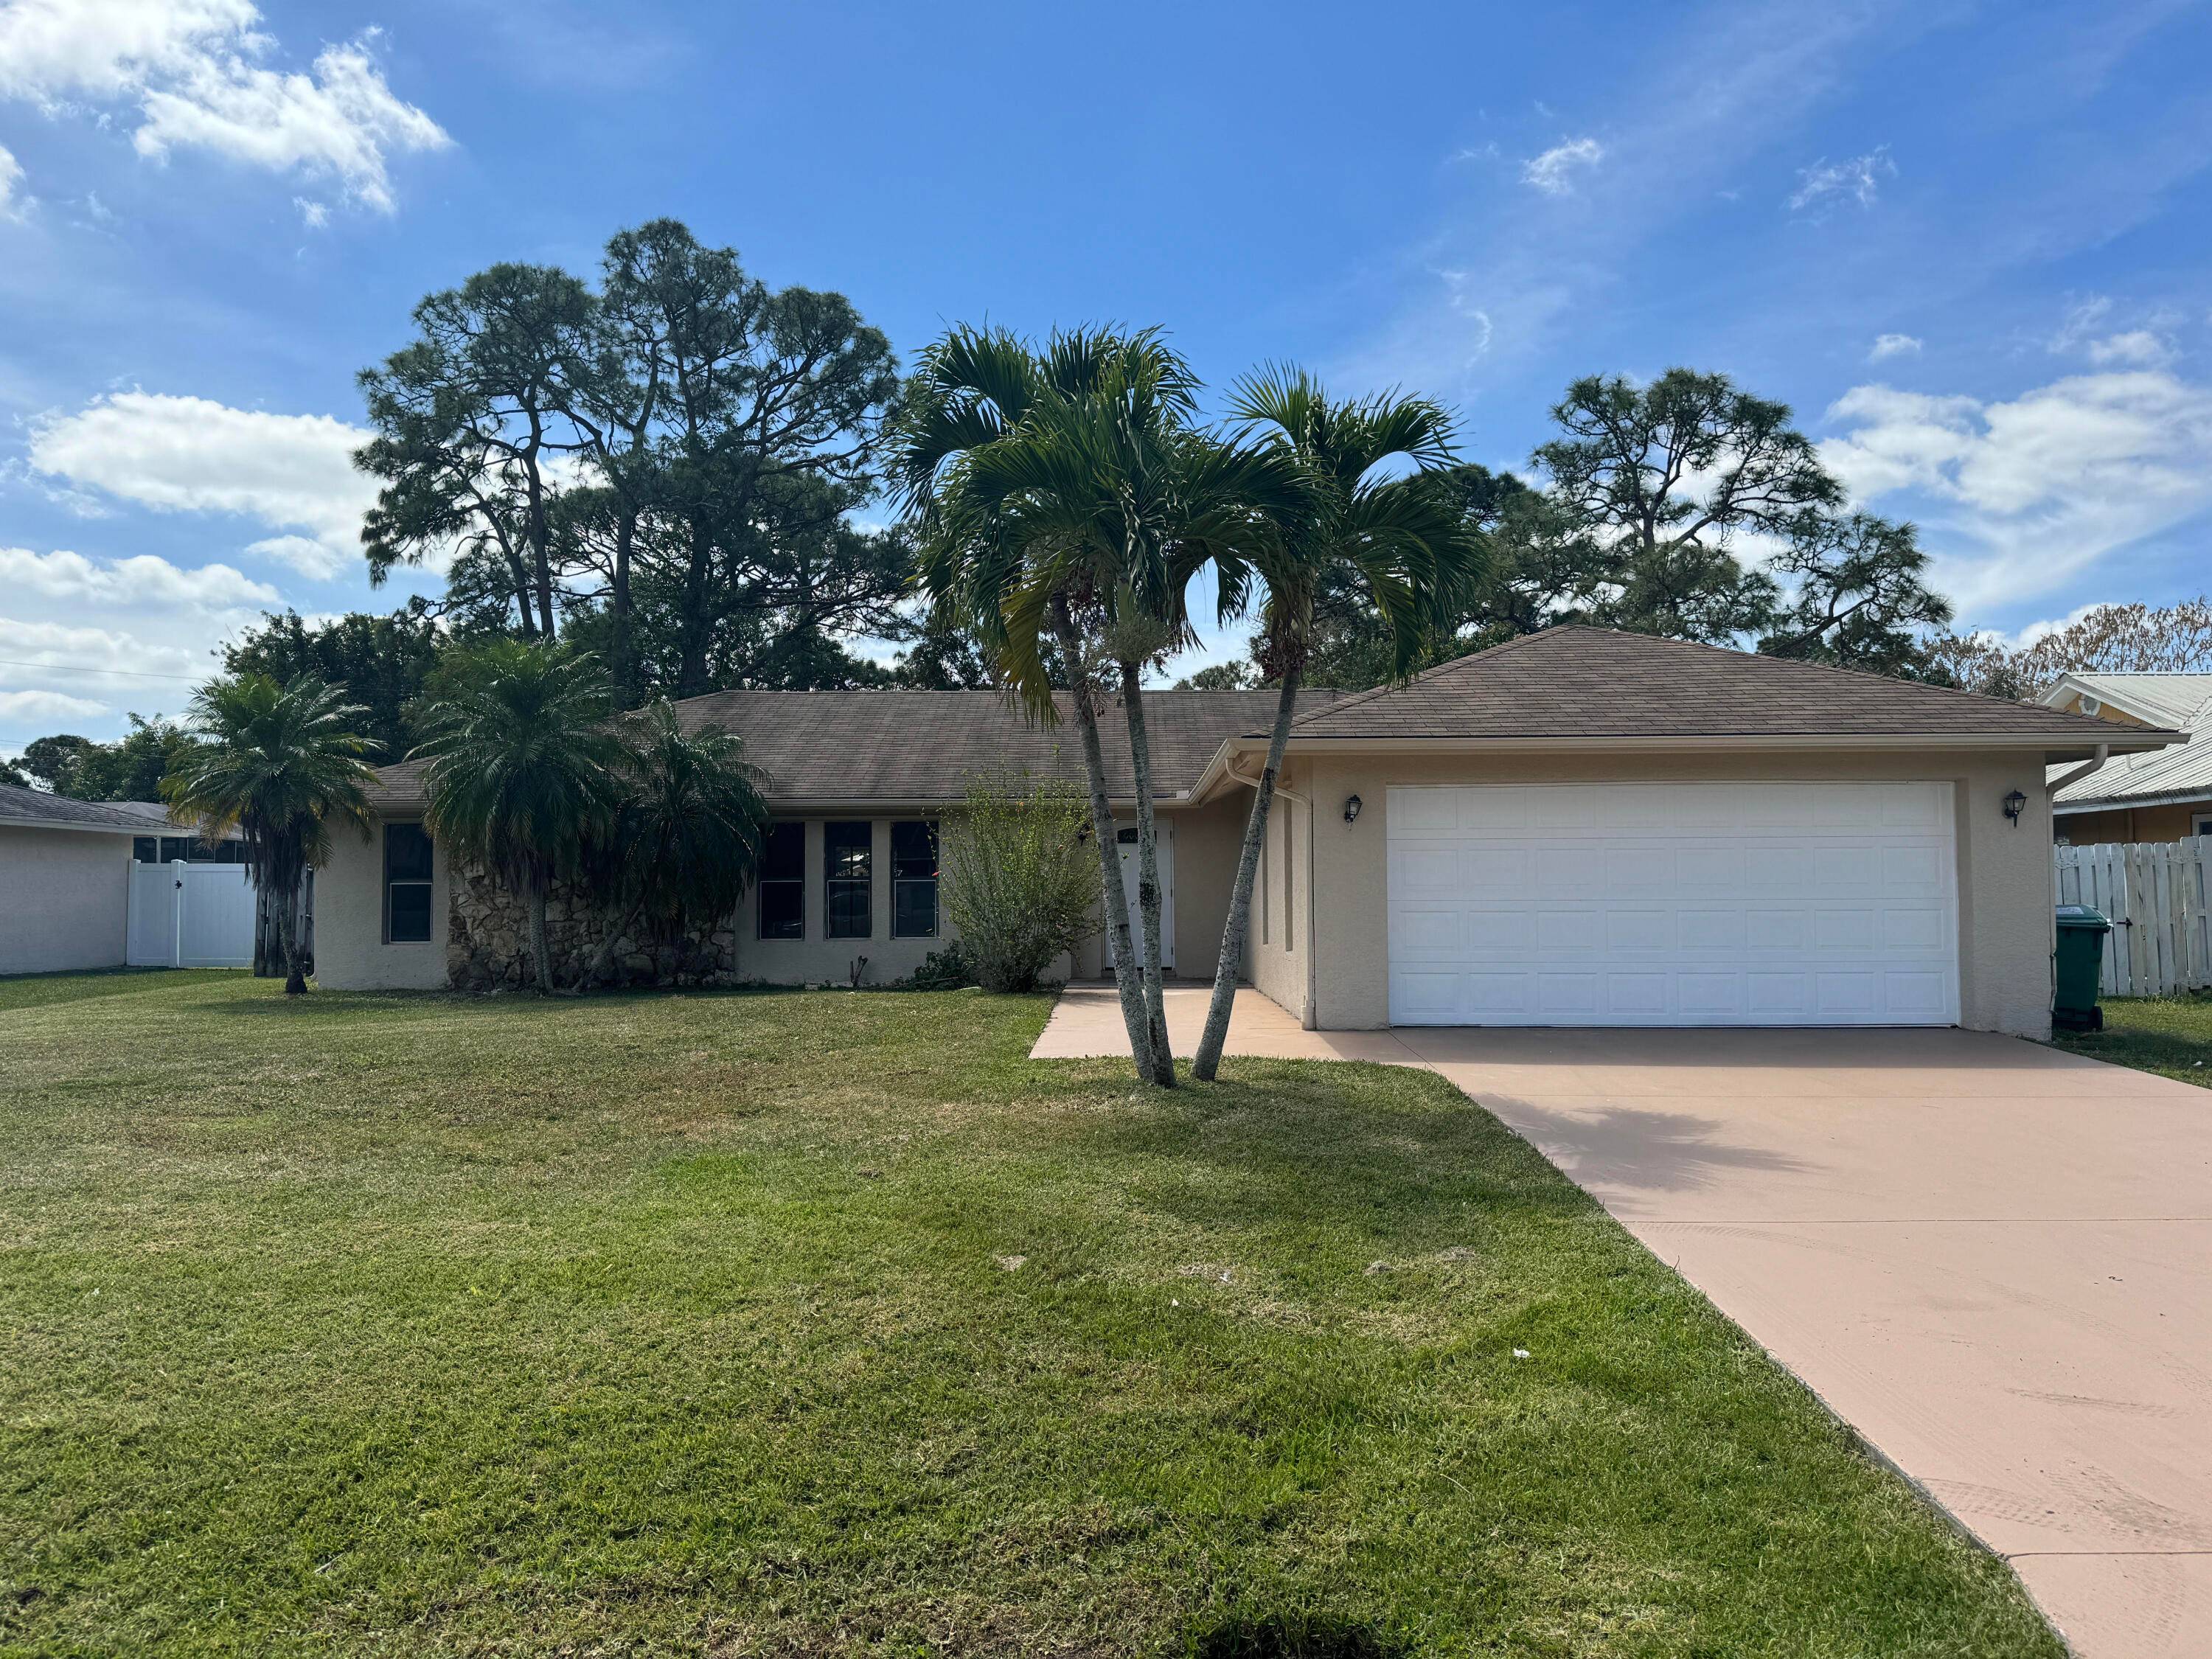 Come check out this centrally located 3 BED 2 BATH home in sunny Port St Lucie !